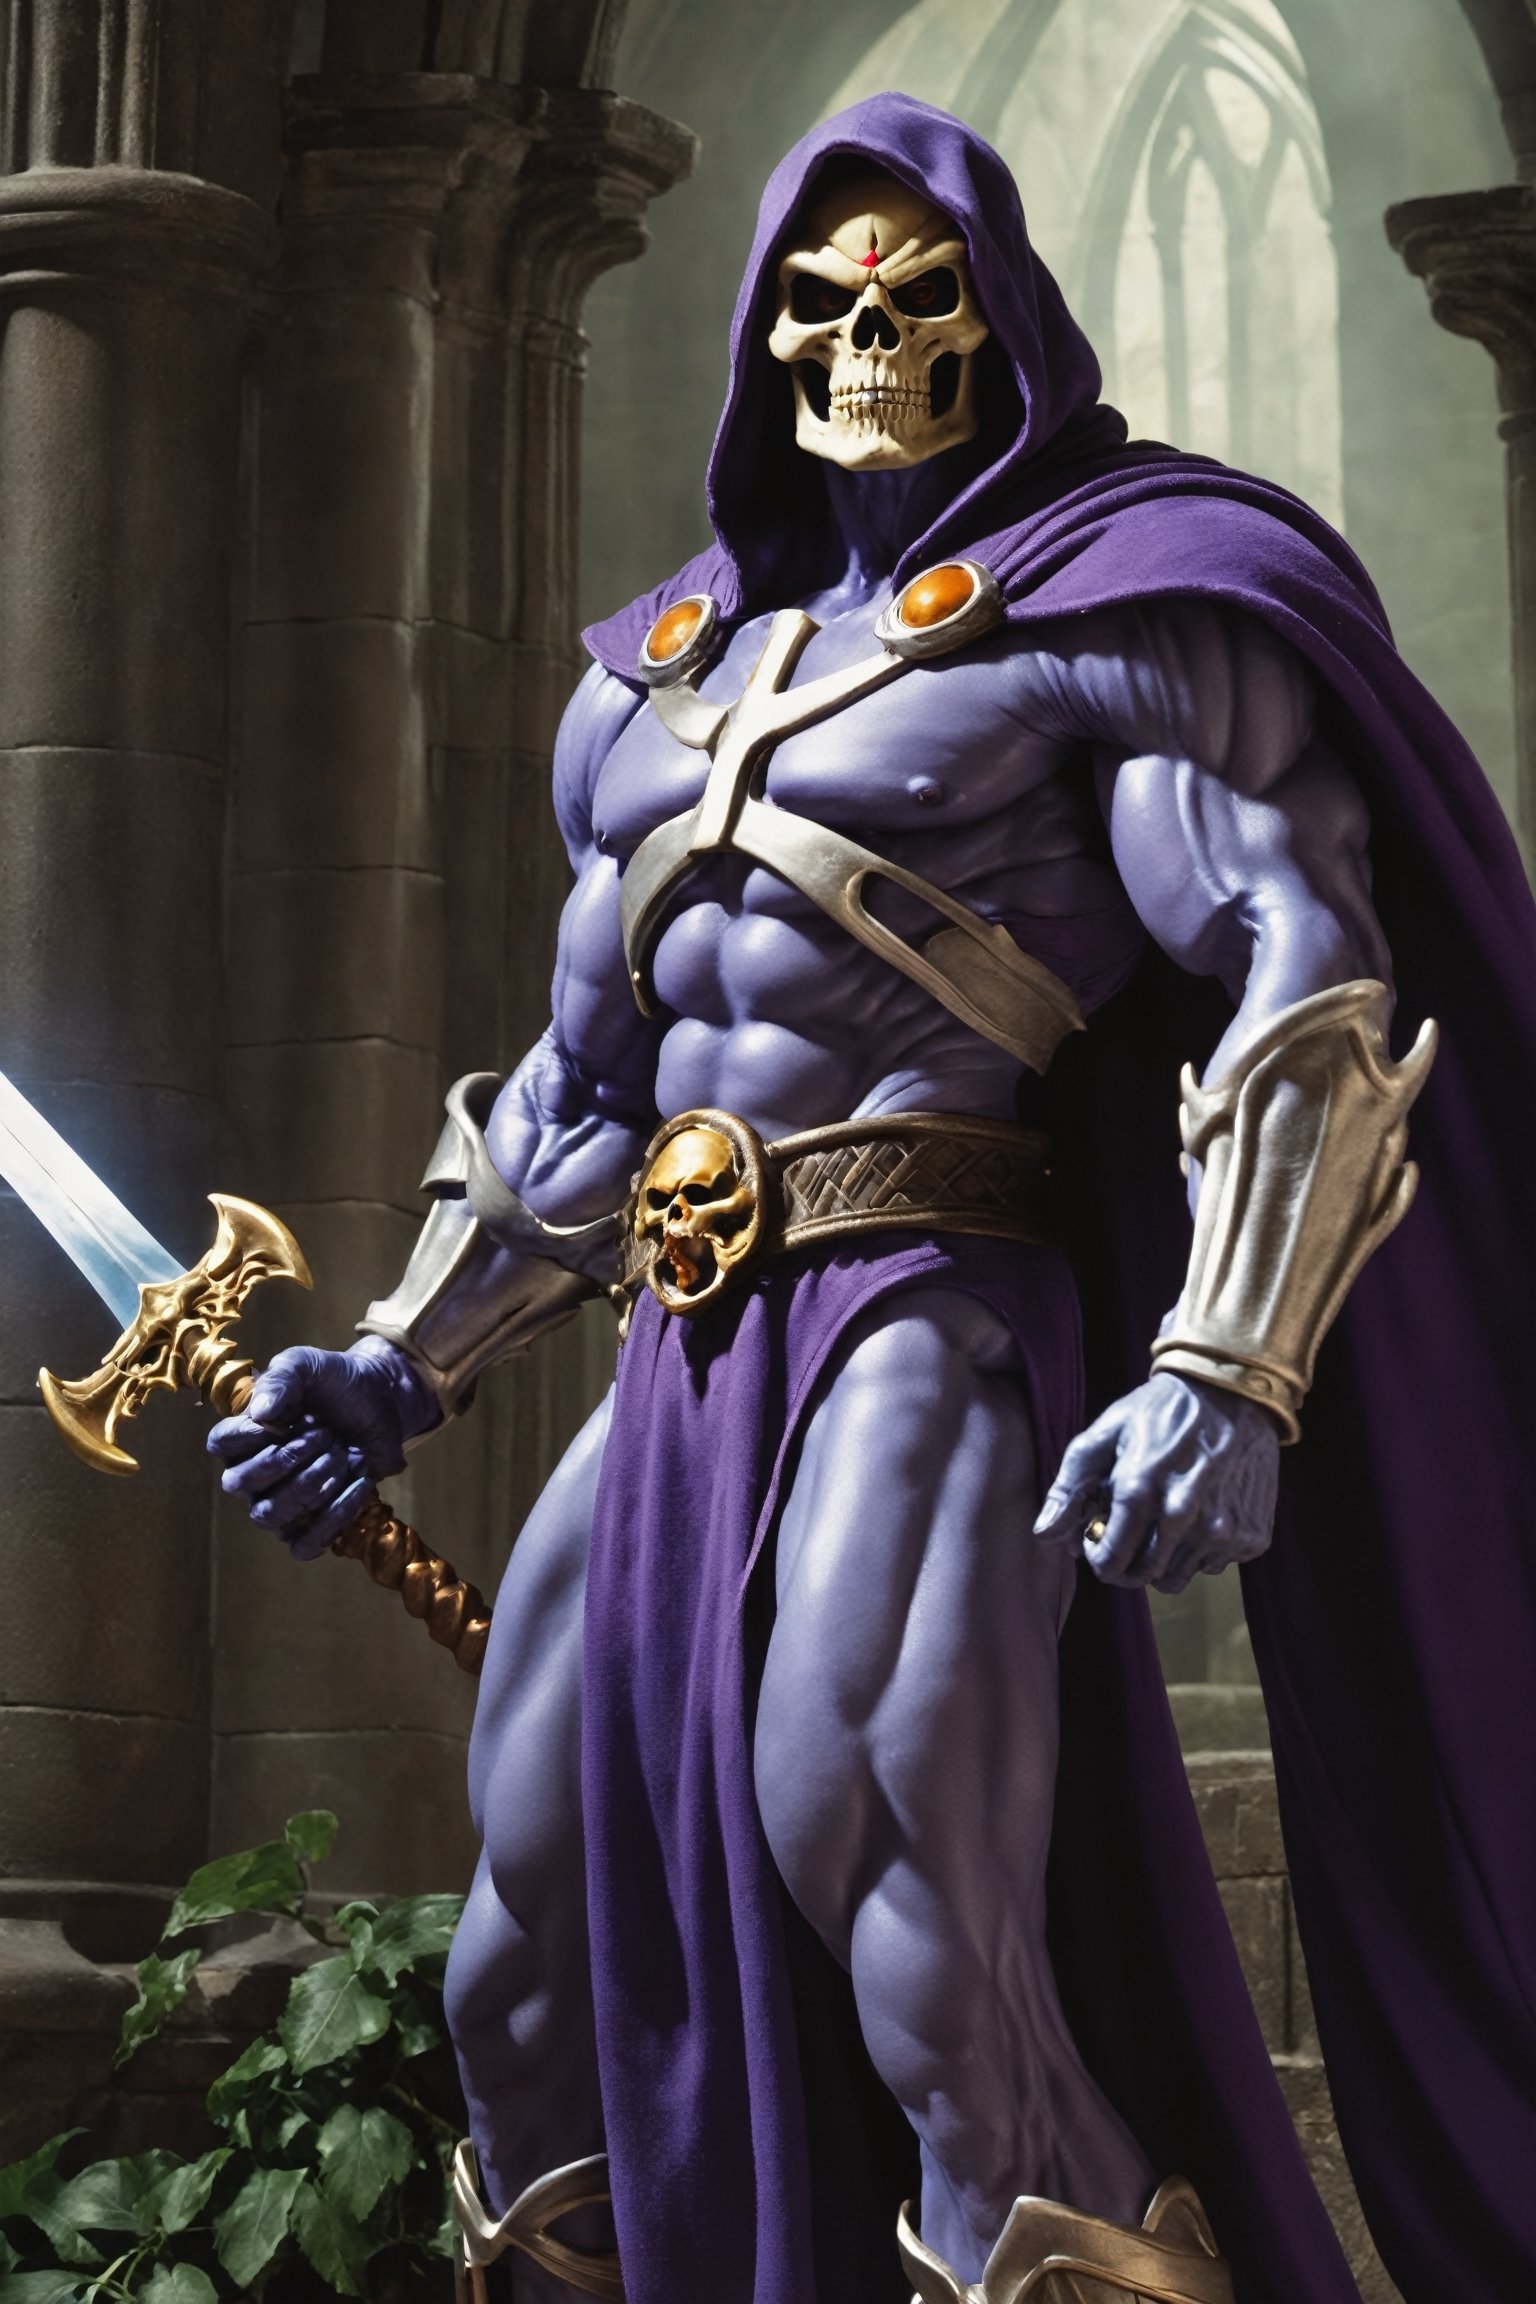 Skeletor, draped in dark necromantic attire, commands the powers of the afterlife. His muscular form is adorned with skeletal motifs, and his gauntleted hands wield a Havoc Staff imbued with dark energy. Skeletor's relentless pursuit of Castle Grayskull is driven by an undying thirst for power and domination.